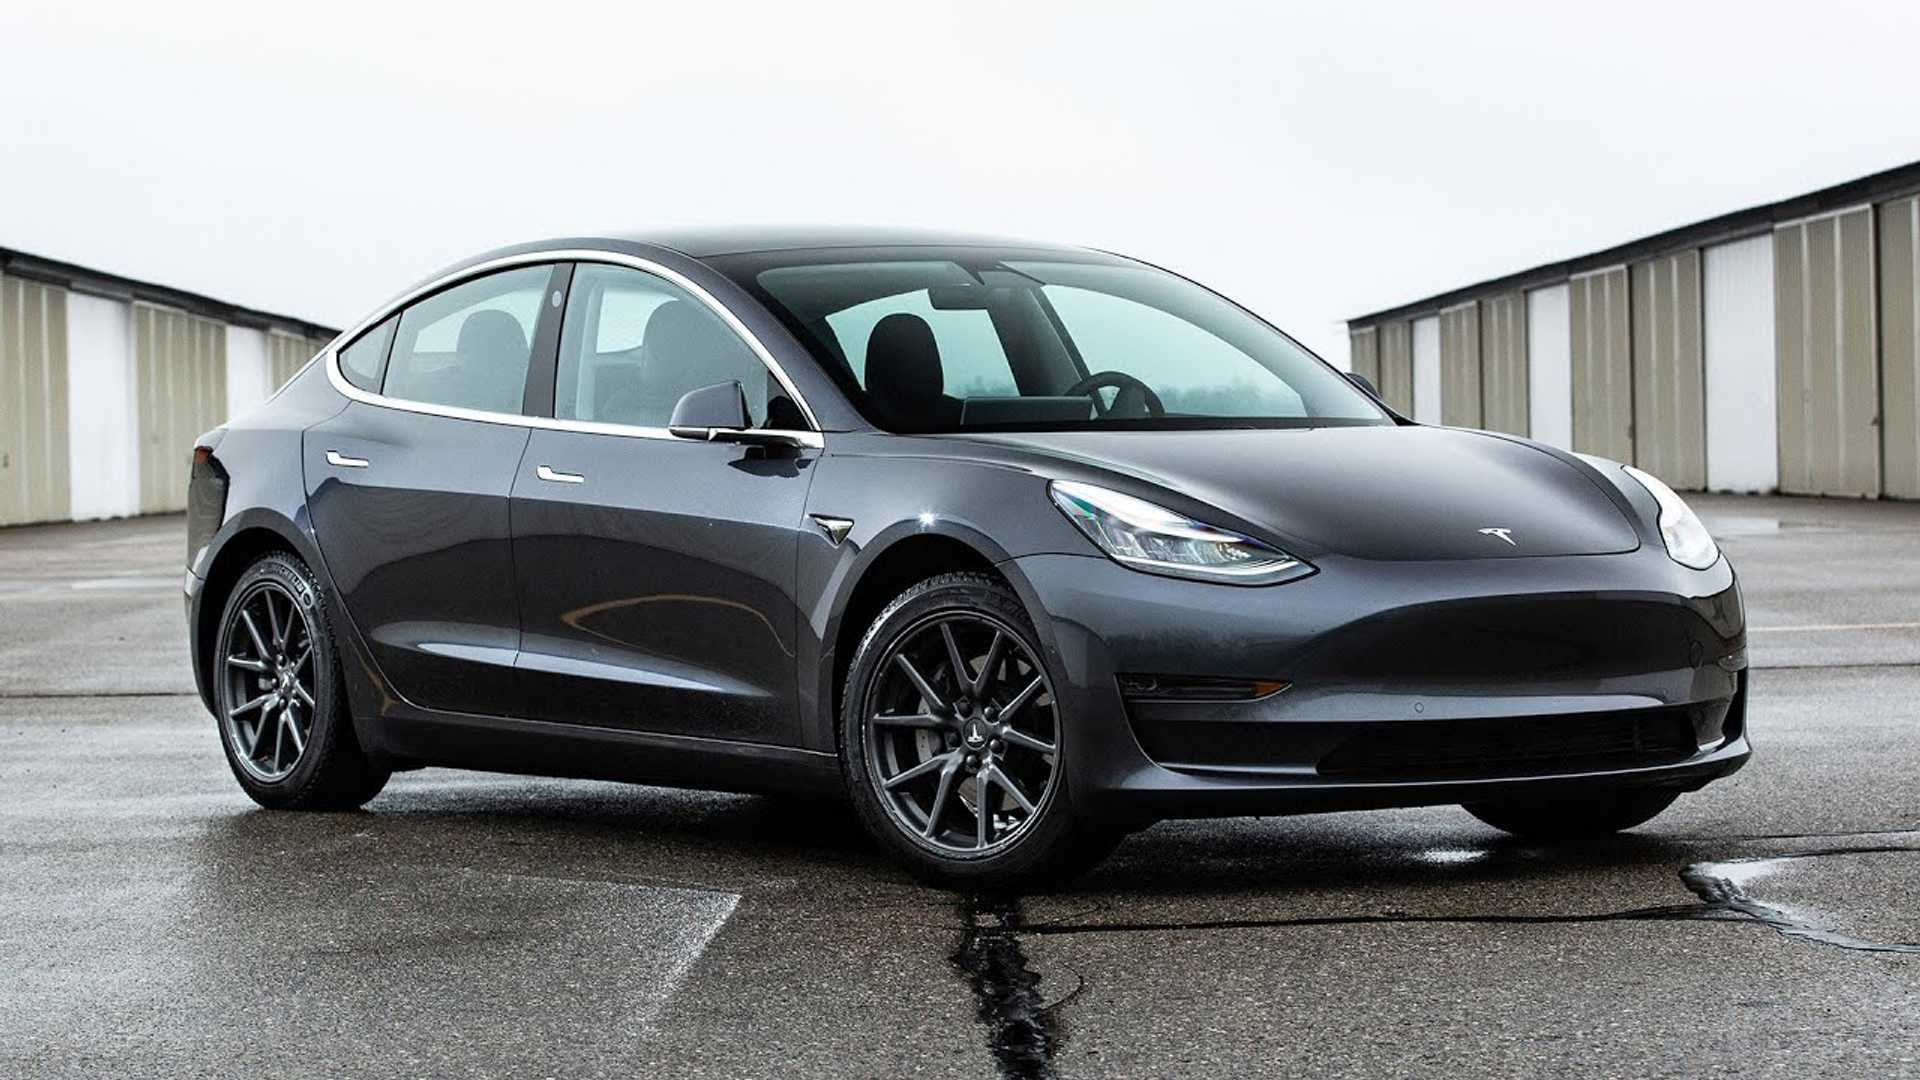 Tesla Model 3 most searched electric vehicle on Google search